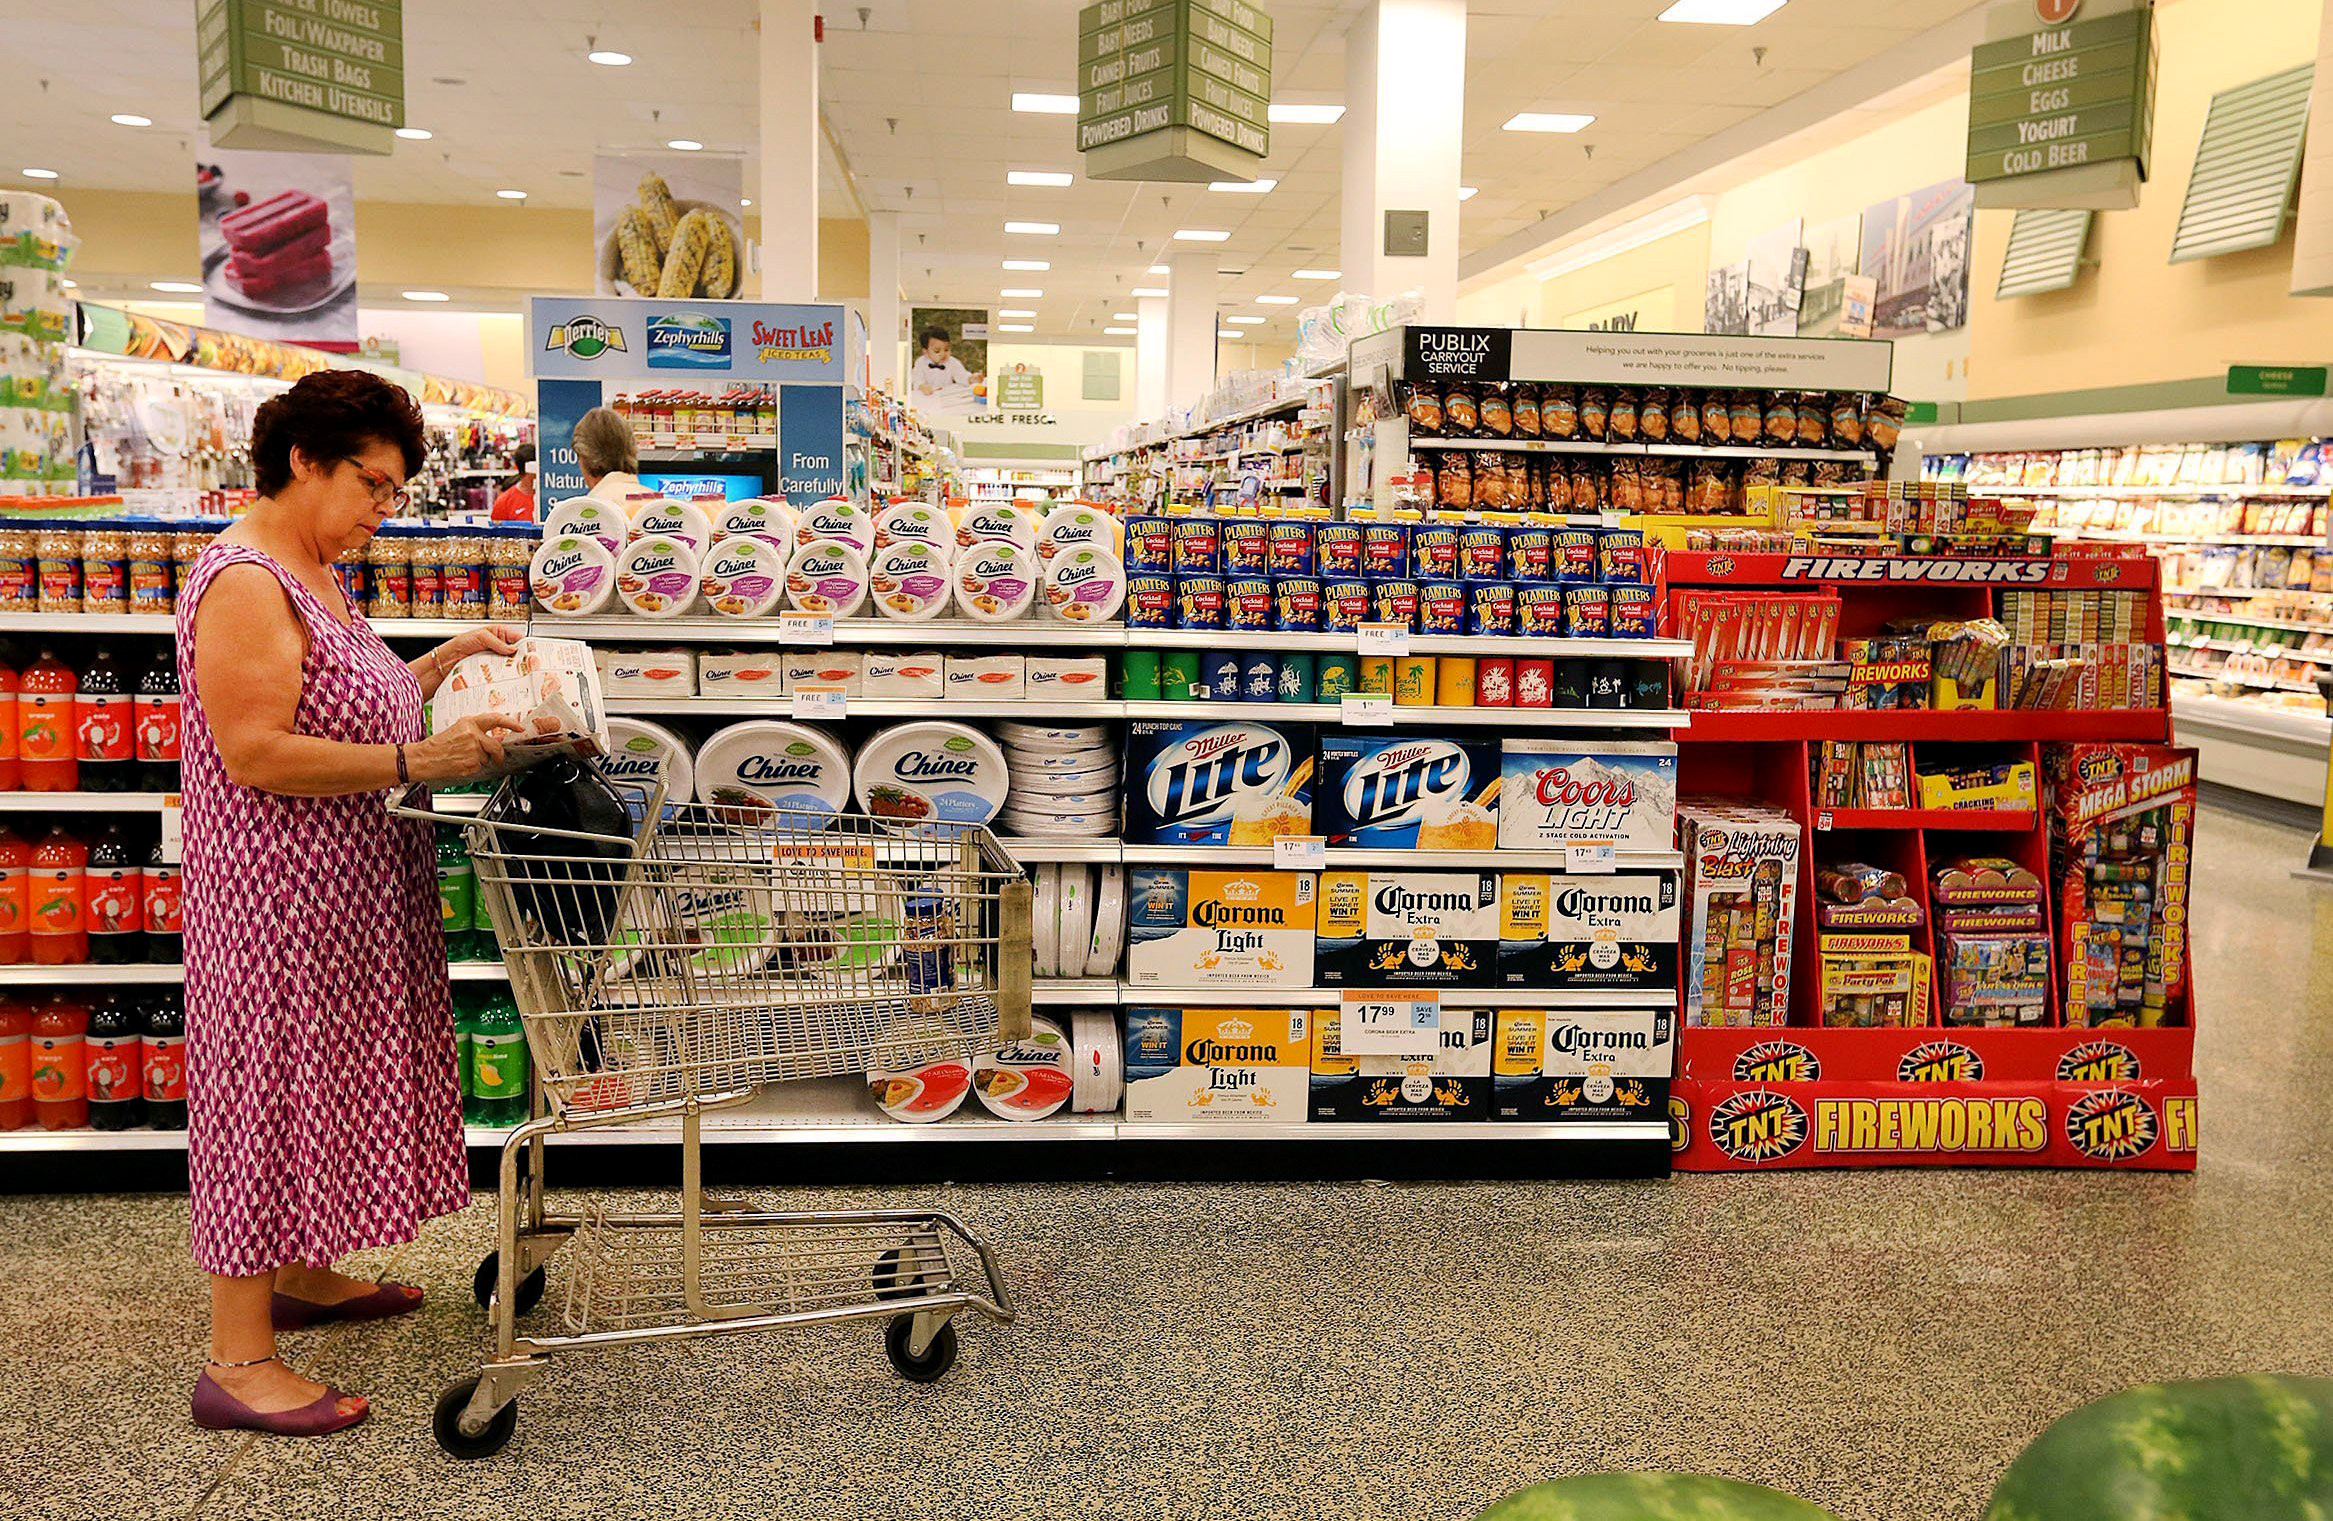 PHOTO: A patron checks for sale items as she pauses near a Publix display in this file photo.